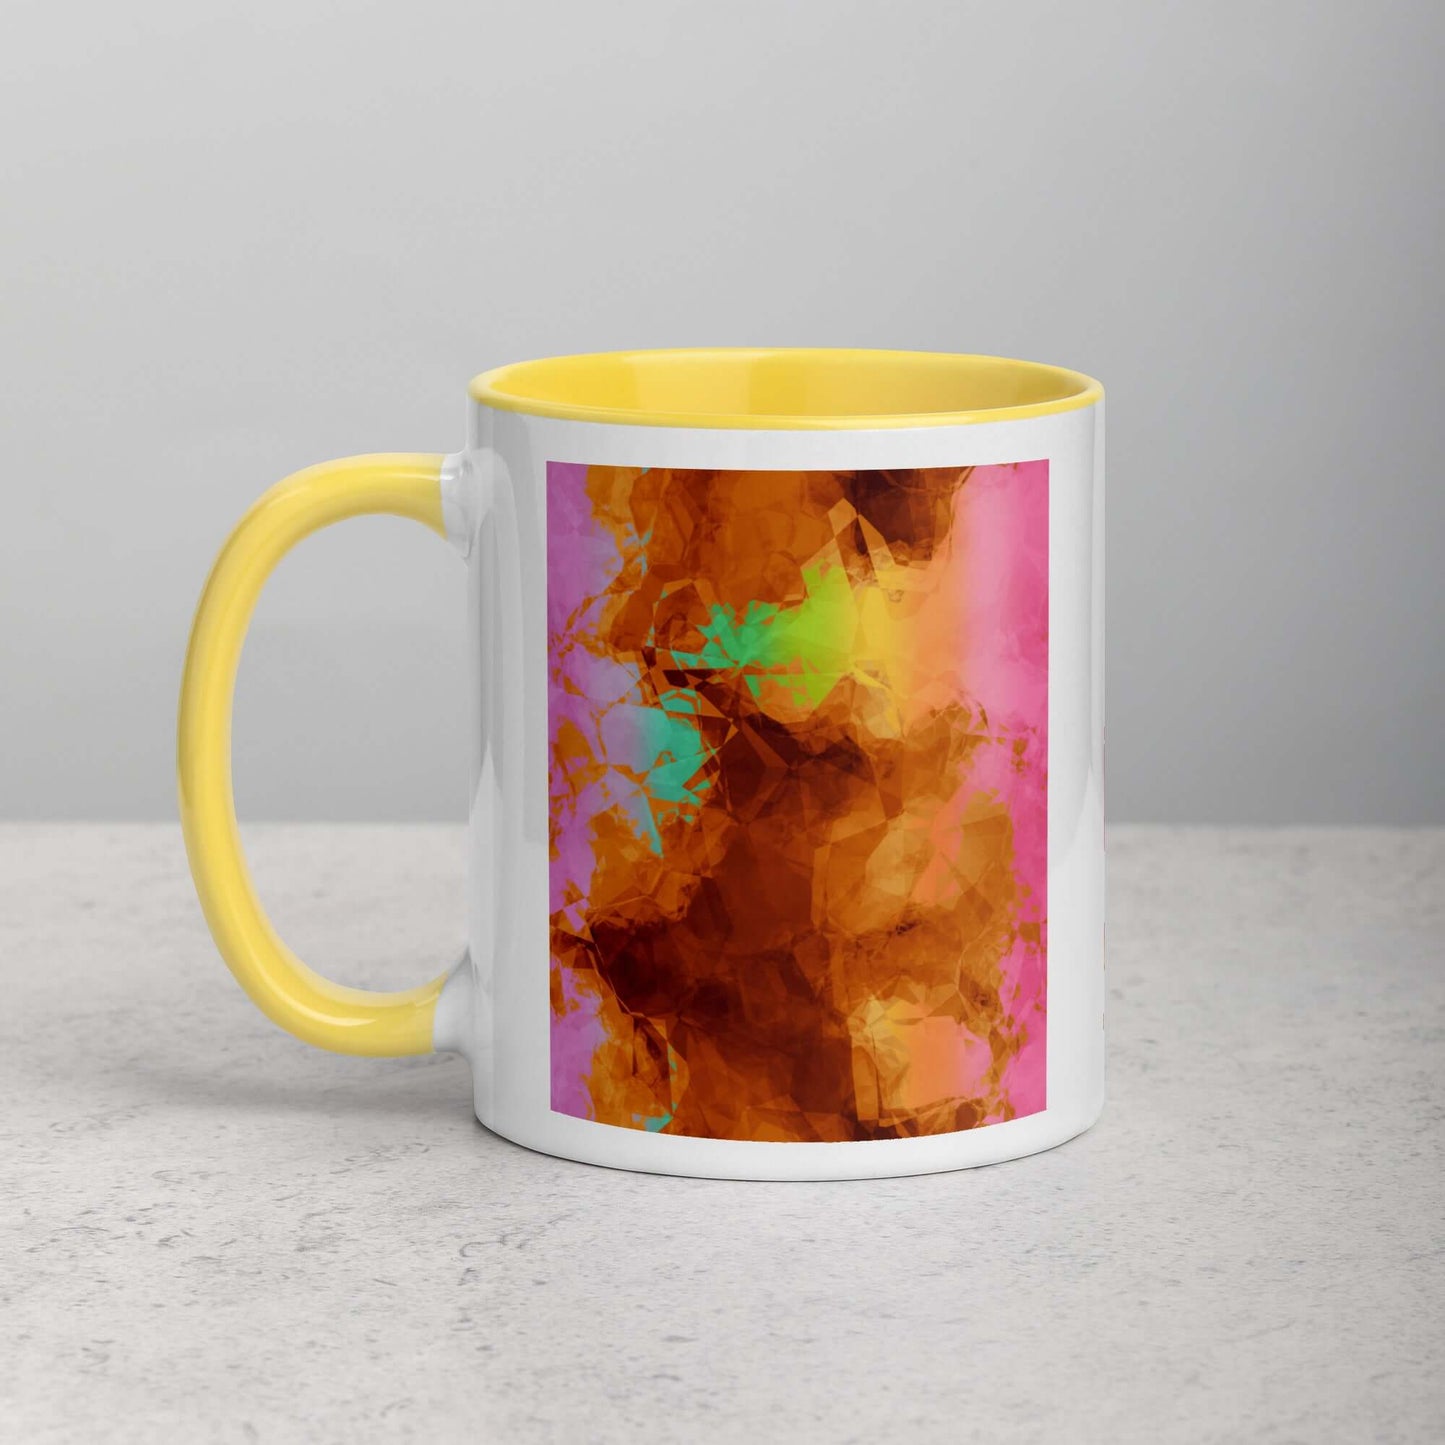 Abstract Smoky Rainbow on Brown Background “Burnt Rainbow Crumple” Abstract Art Mug with Bright Yellow Color Inside Left Handed Front View